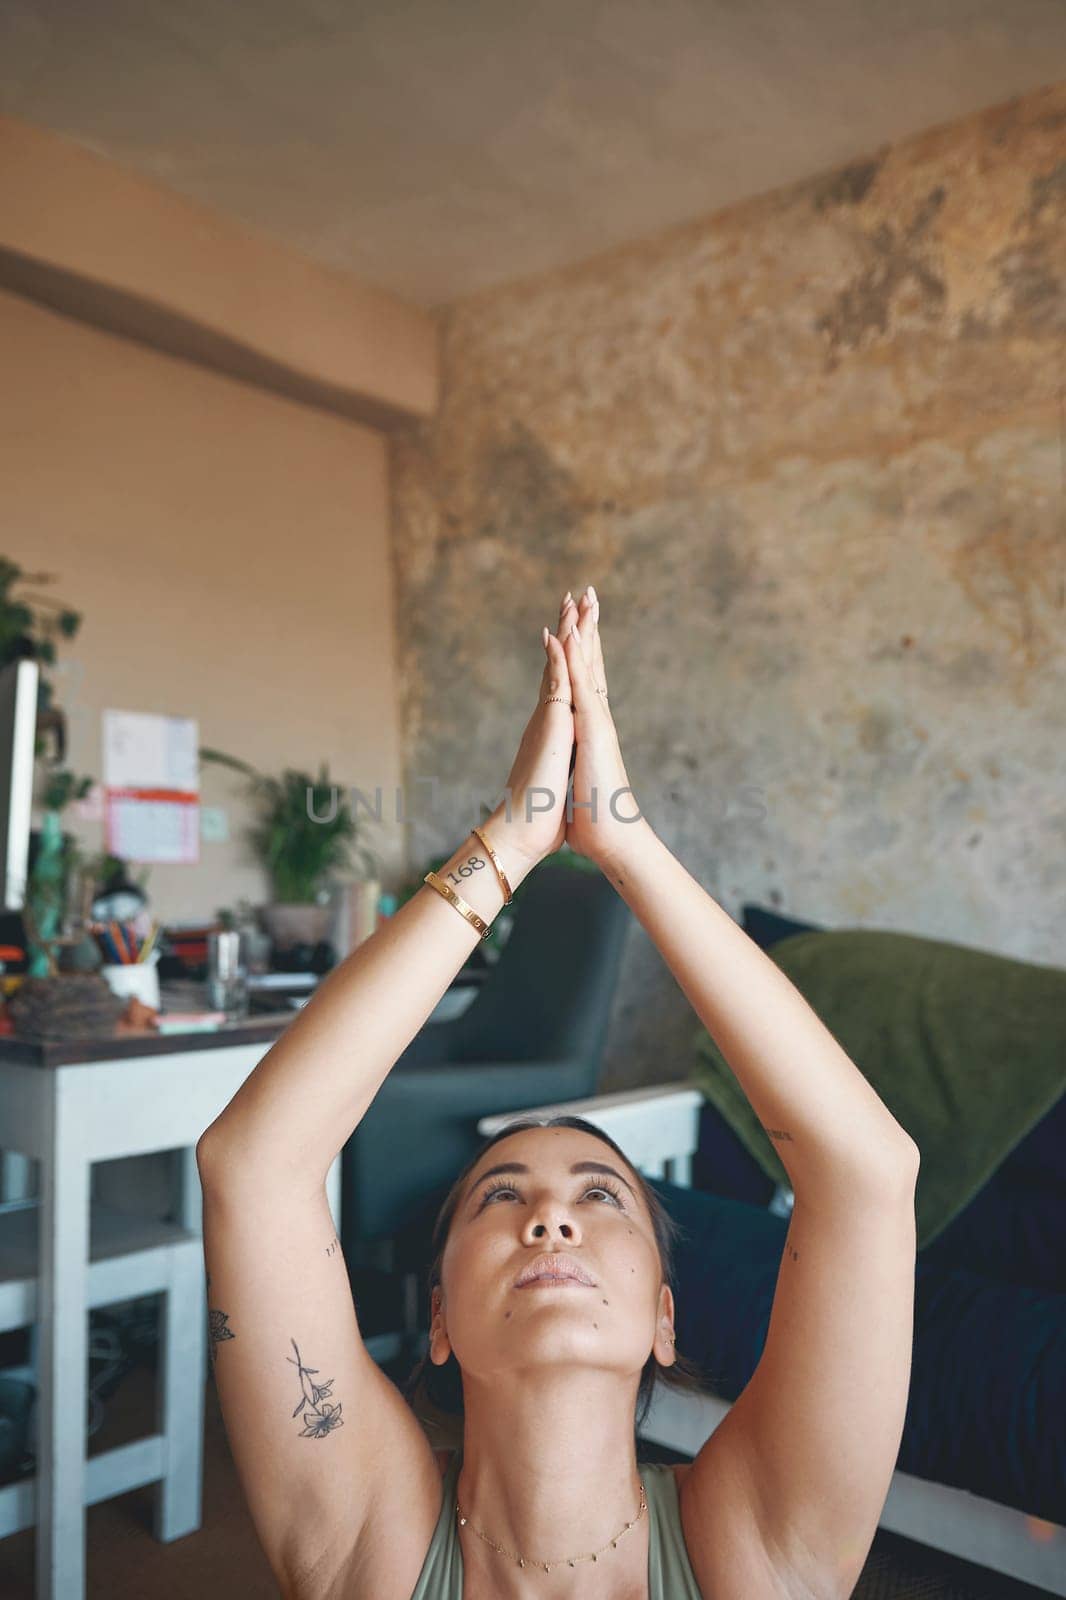 Yoga is a transformative way of life. a young woman meditating while practising yoga at home. by YuriArcurs